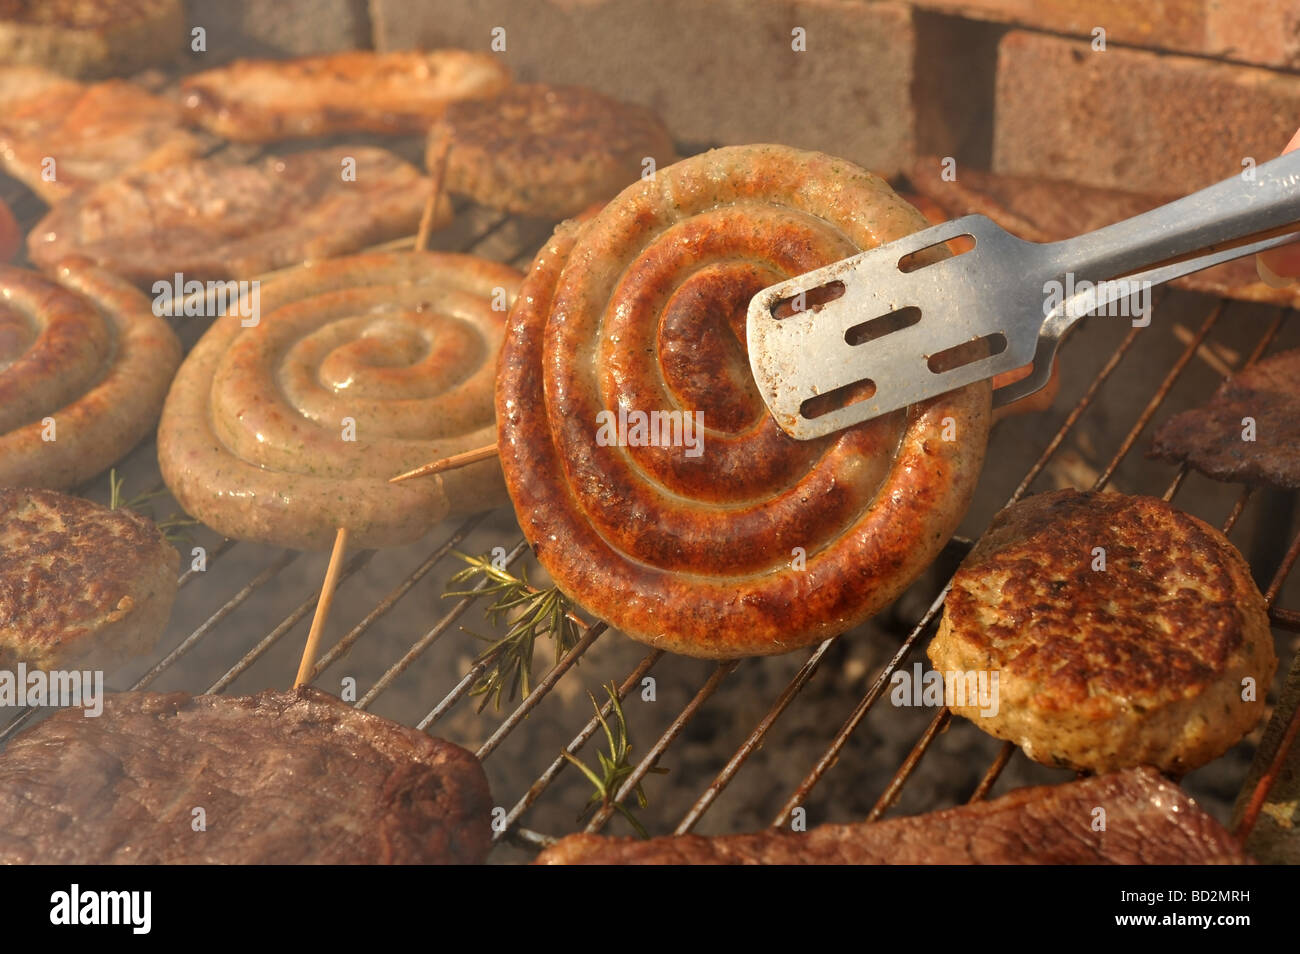 Smokey charcoal meat barbecue focus on tongs turning over a spiral Cumberland sausage Stock Photo